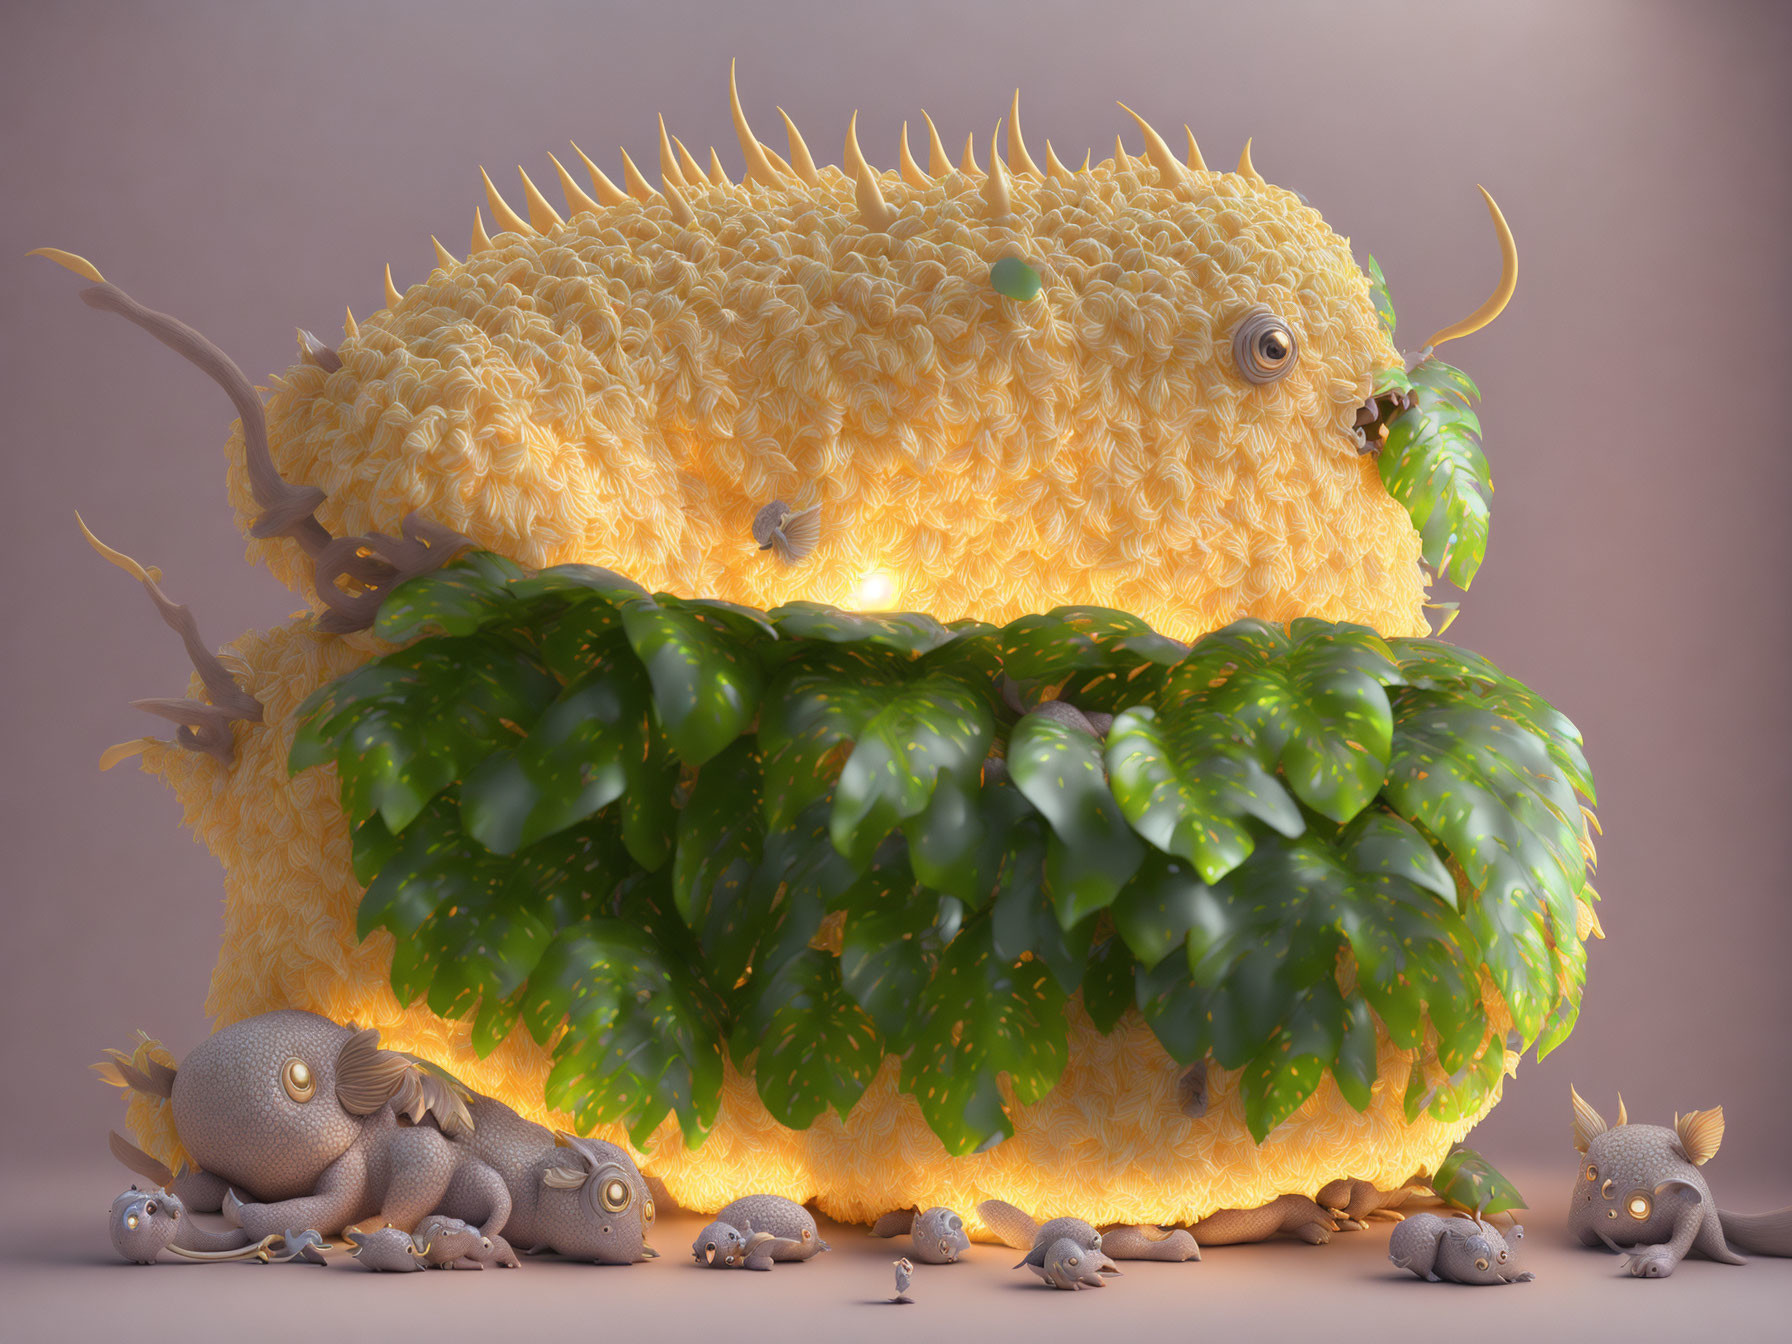 Lemon-textured creature with leaf wings and miniatures on soft background